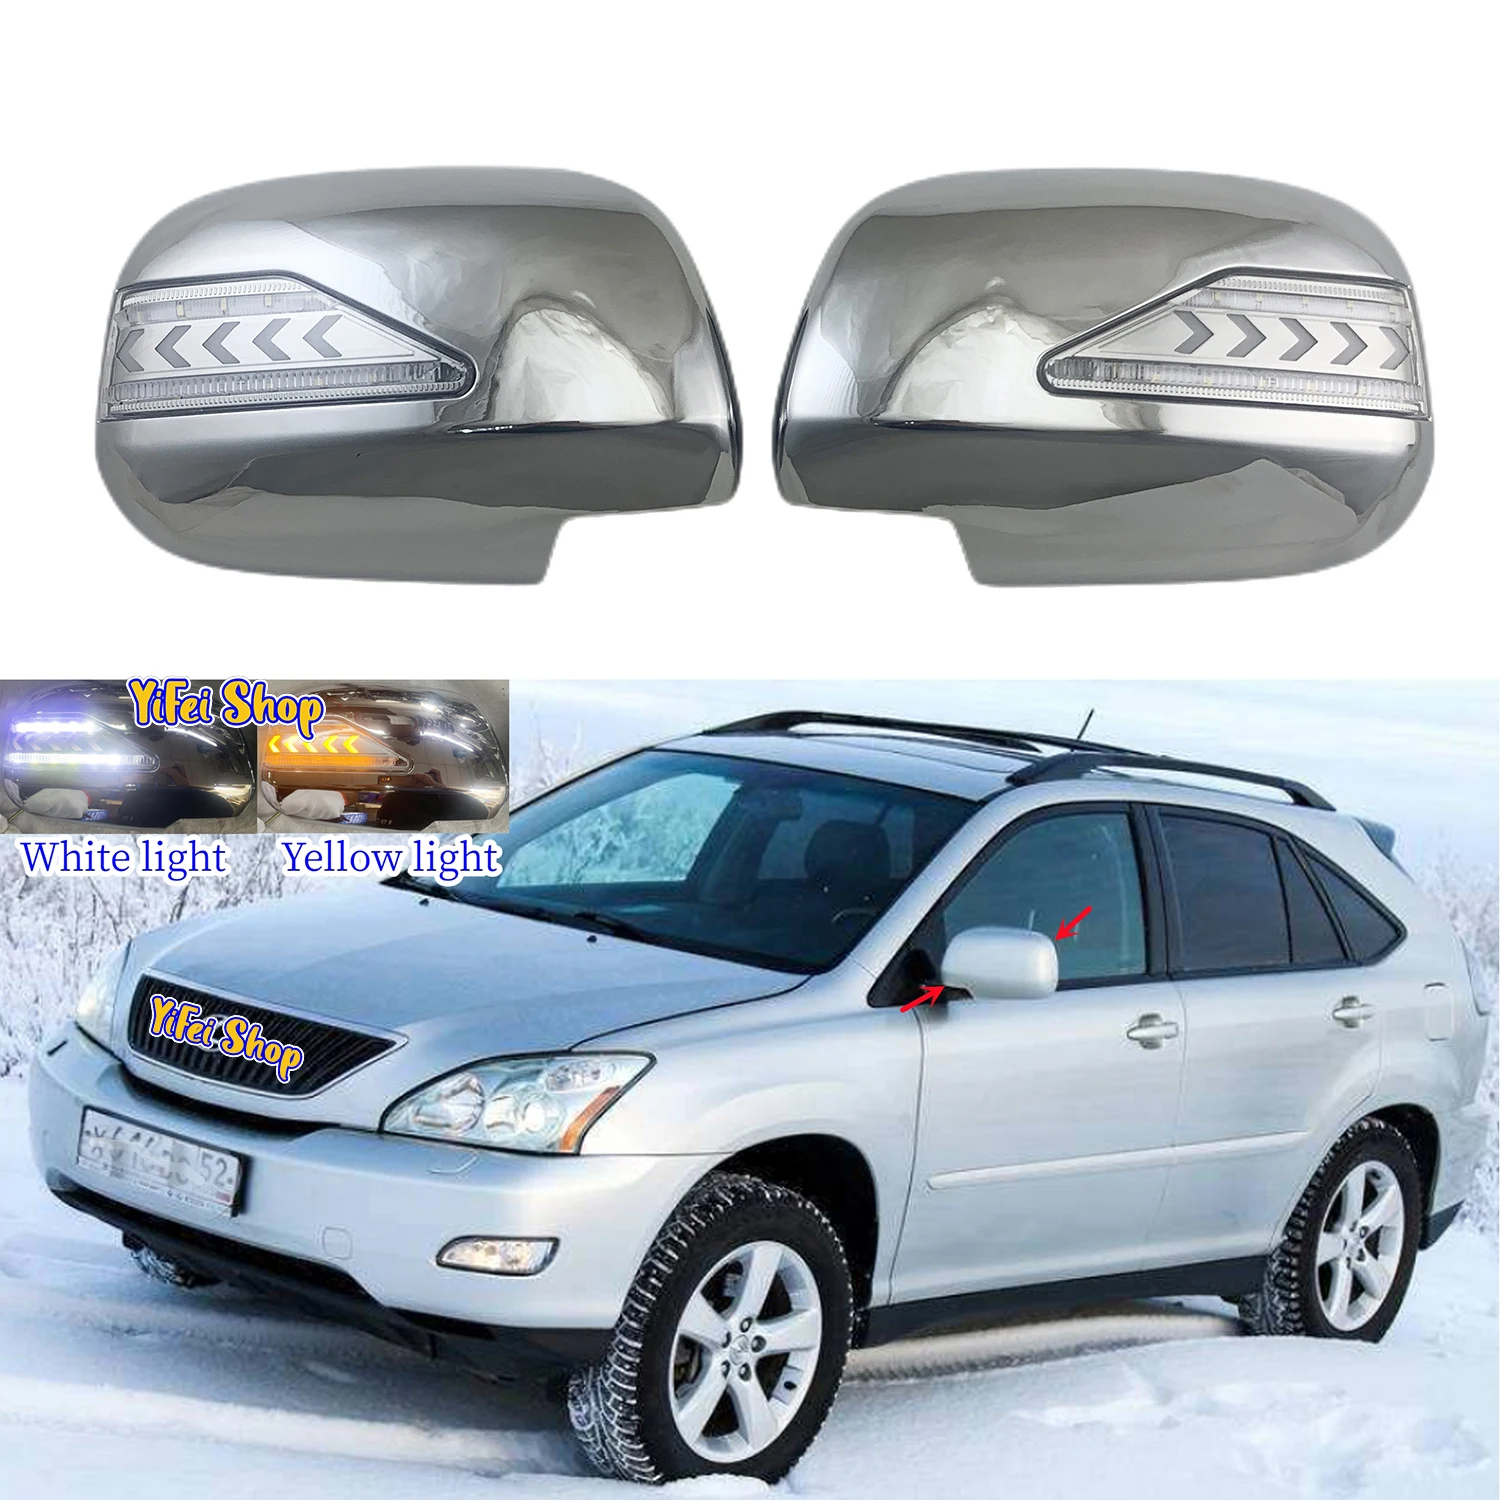 

2pcs Novel Style Car Chrome Accessories Plated Trim For Lexus RX330 RX350 RX400H RX450h Door Mirror Cover With LED